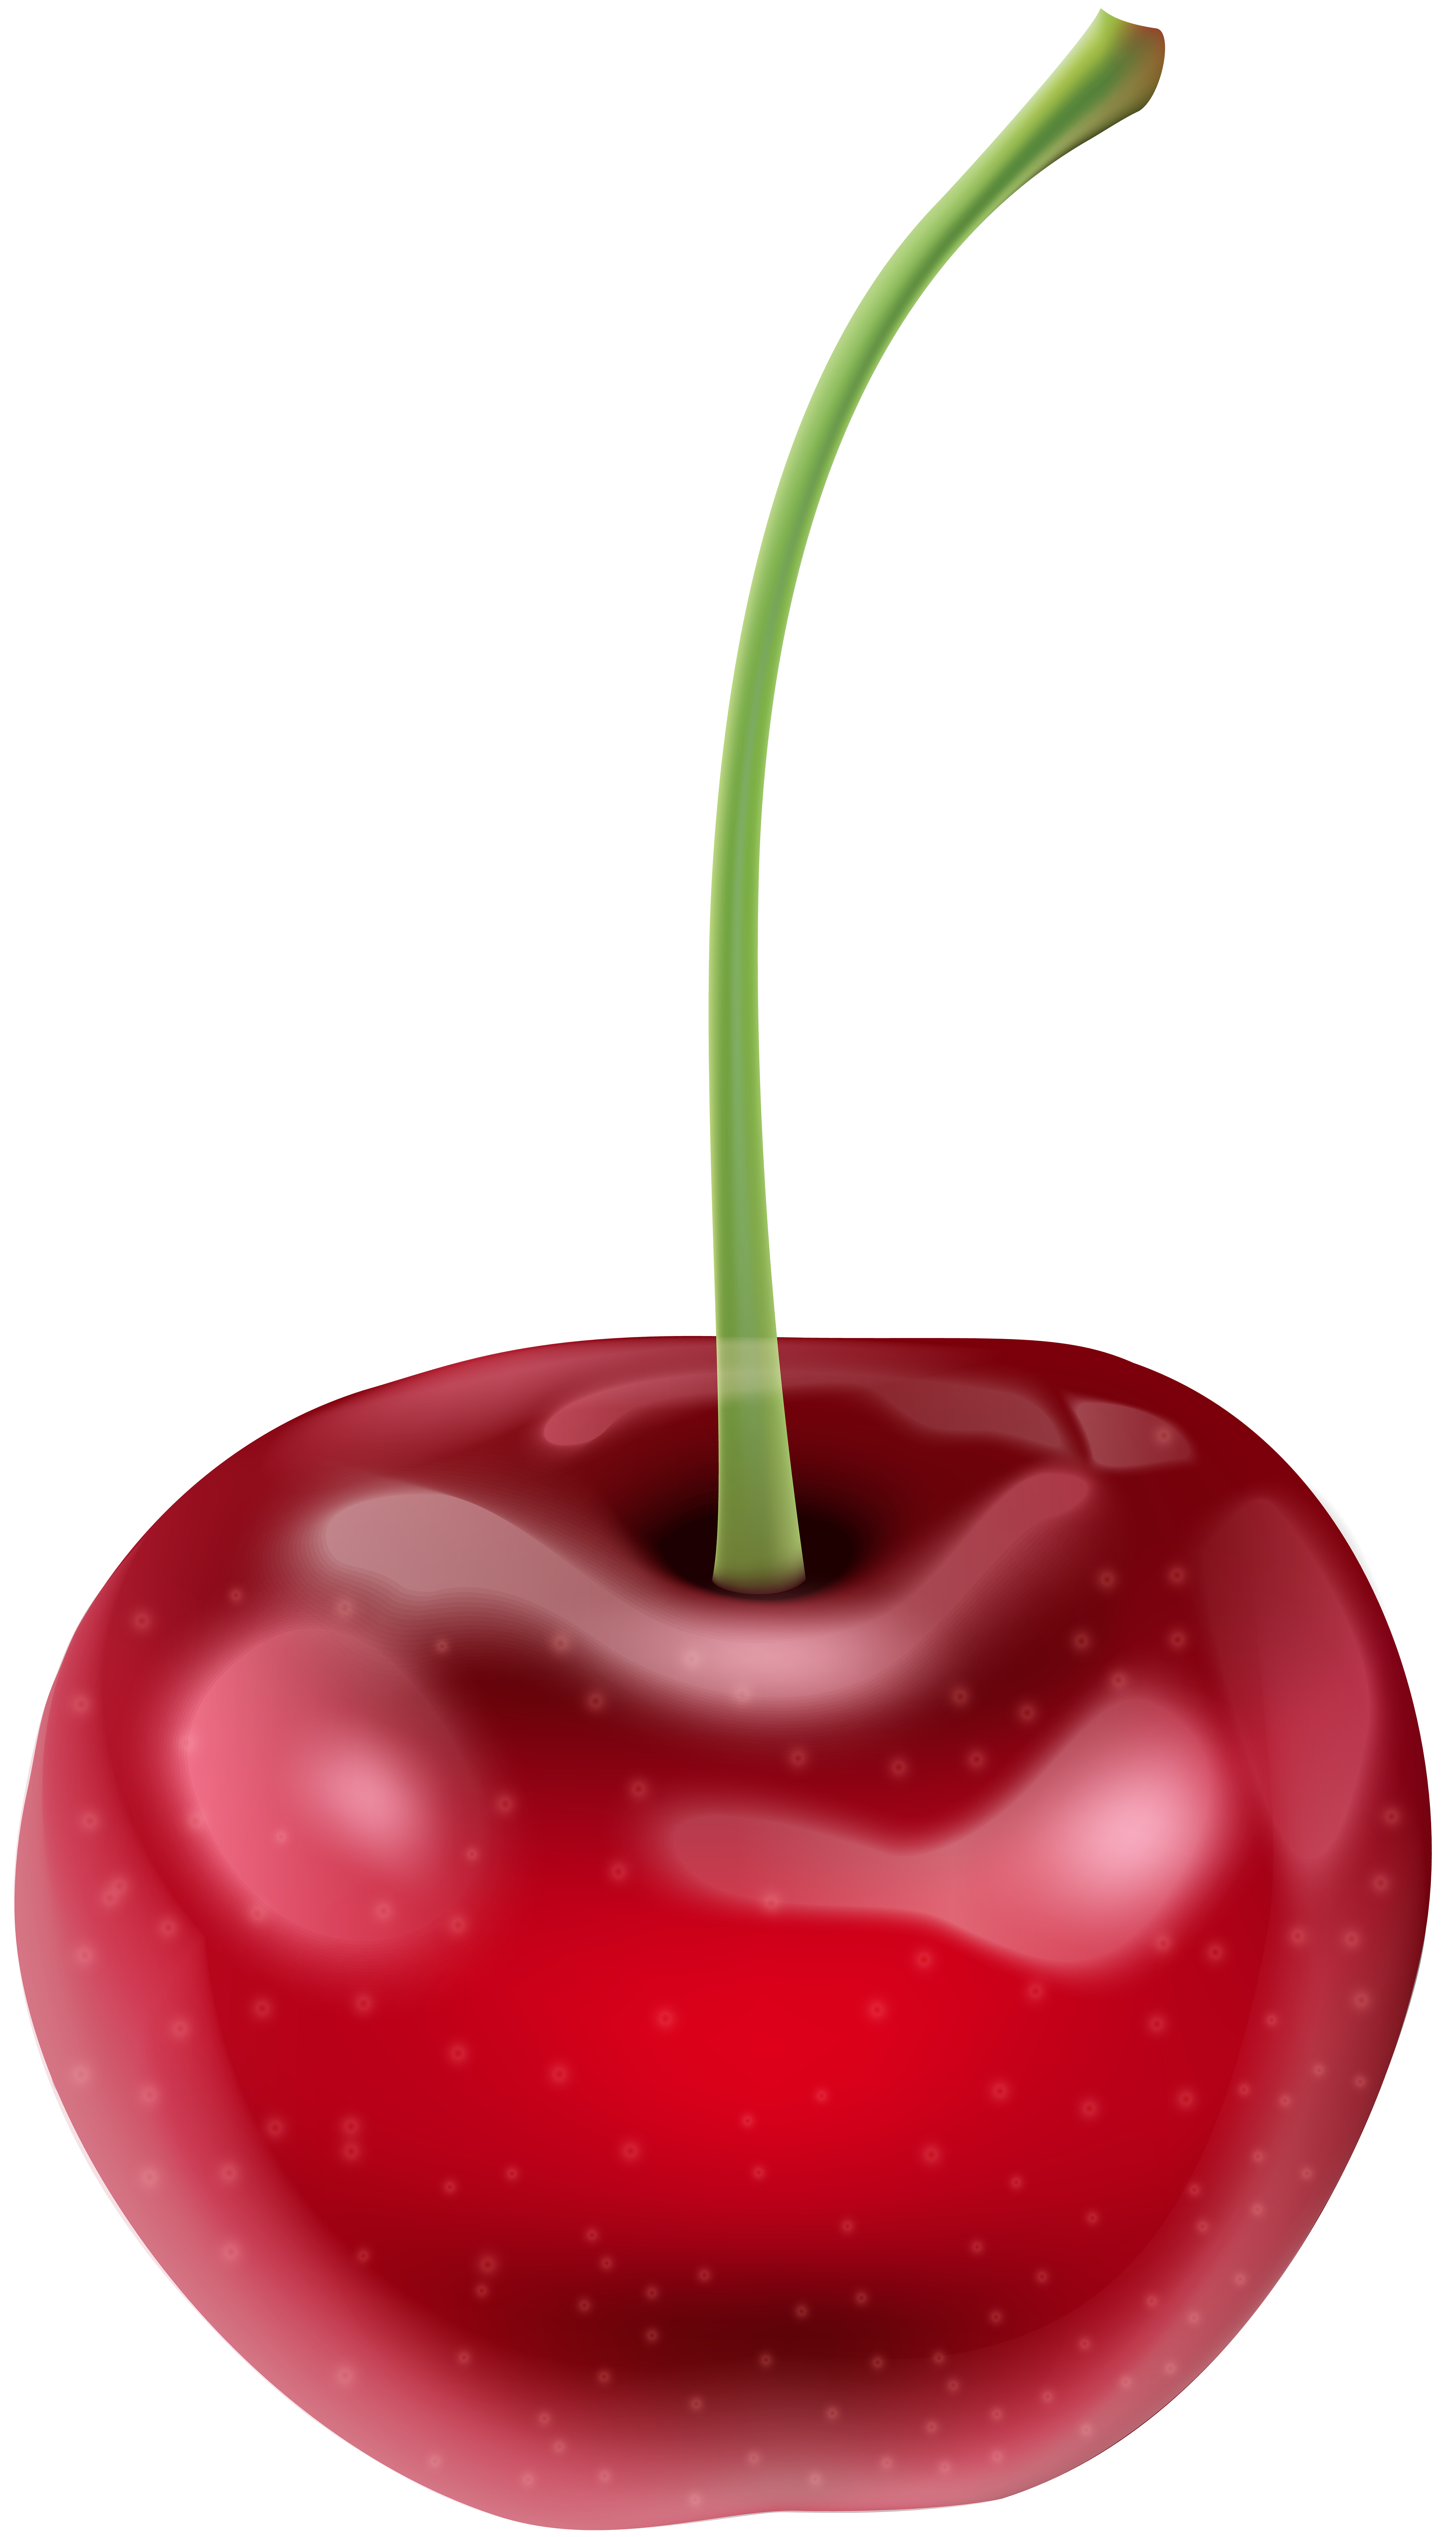 Cherry PNG Clip Art Image | Gallery Yopriceville - High ...